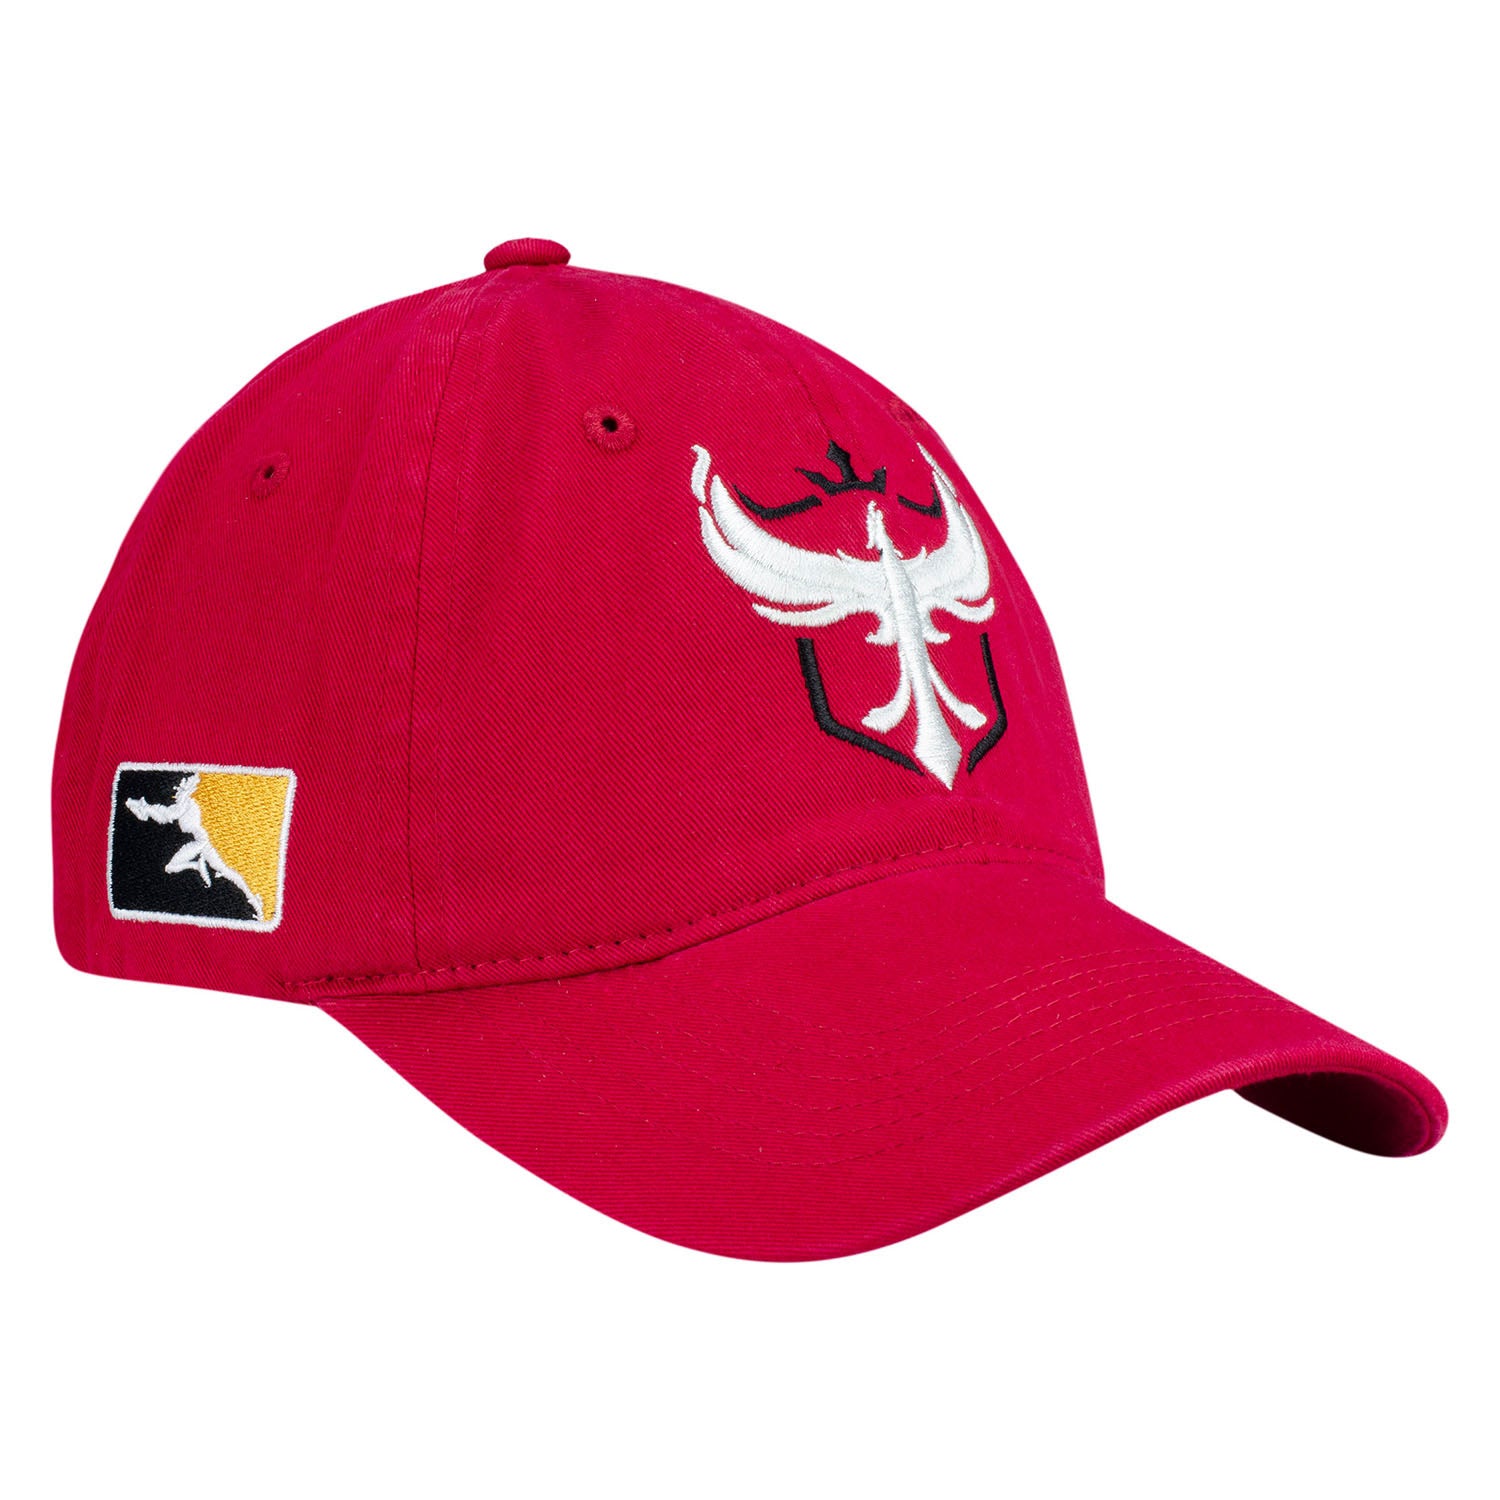 Atlanta Reign Red Dad Hat - Right View